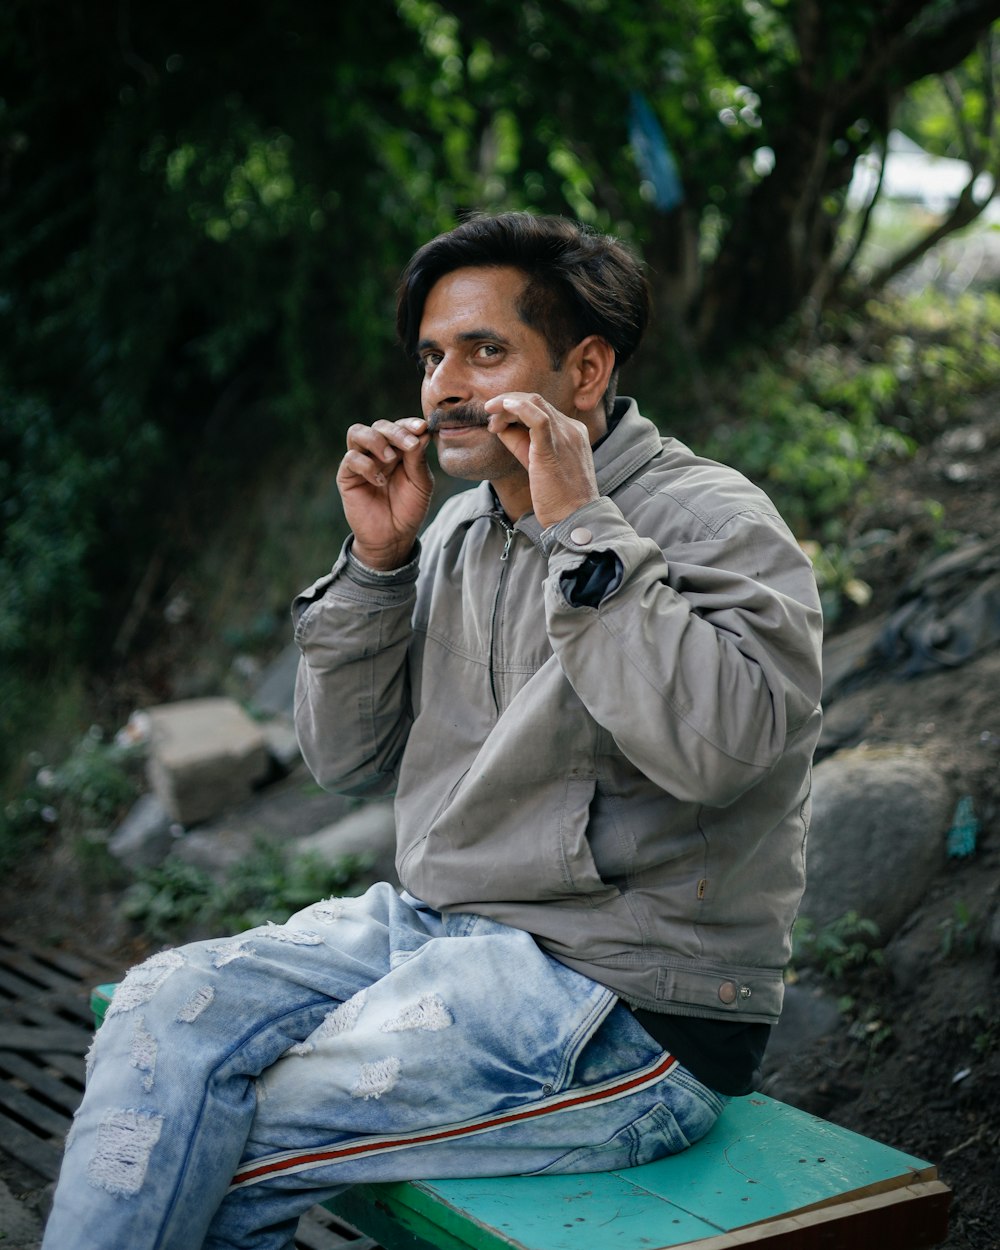 a person sitting on a bench smoking a cigarette